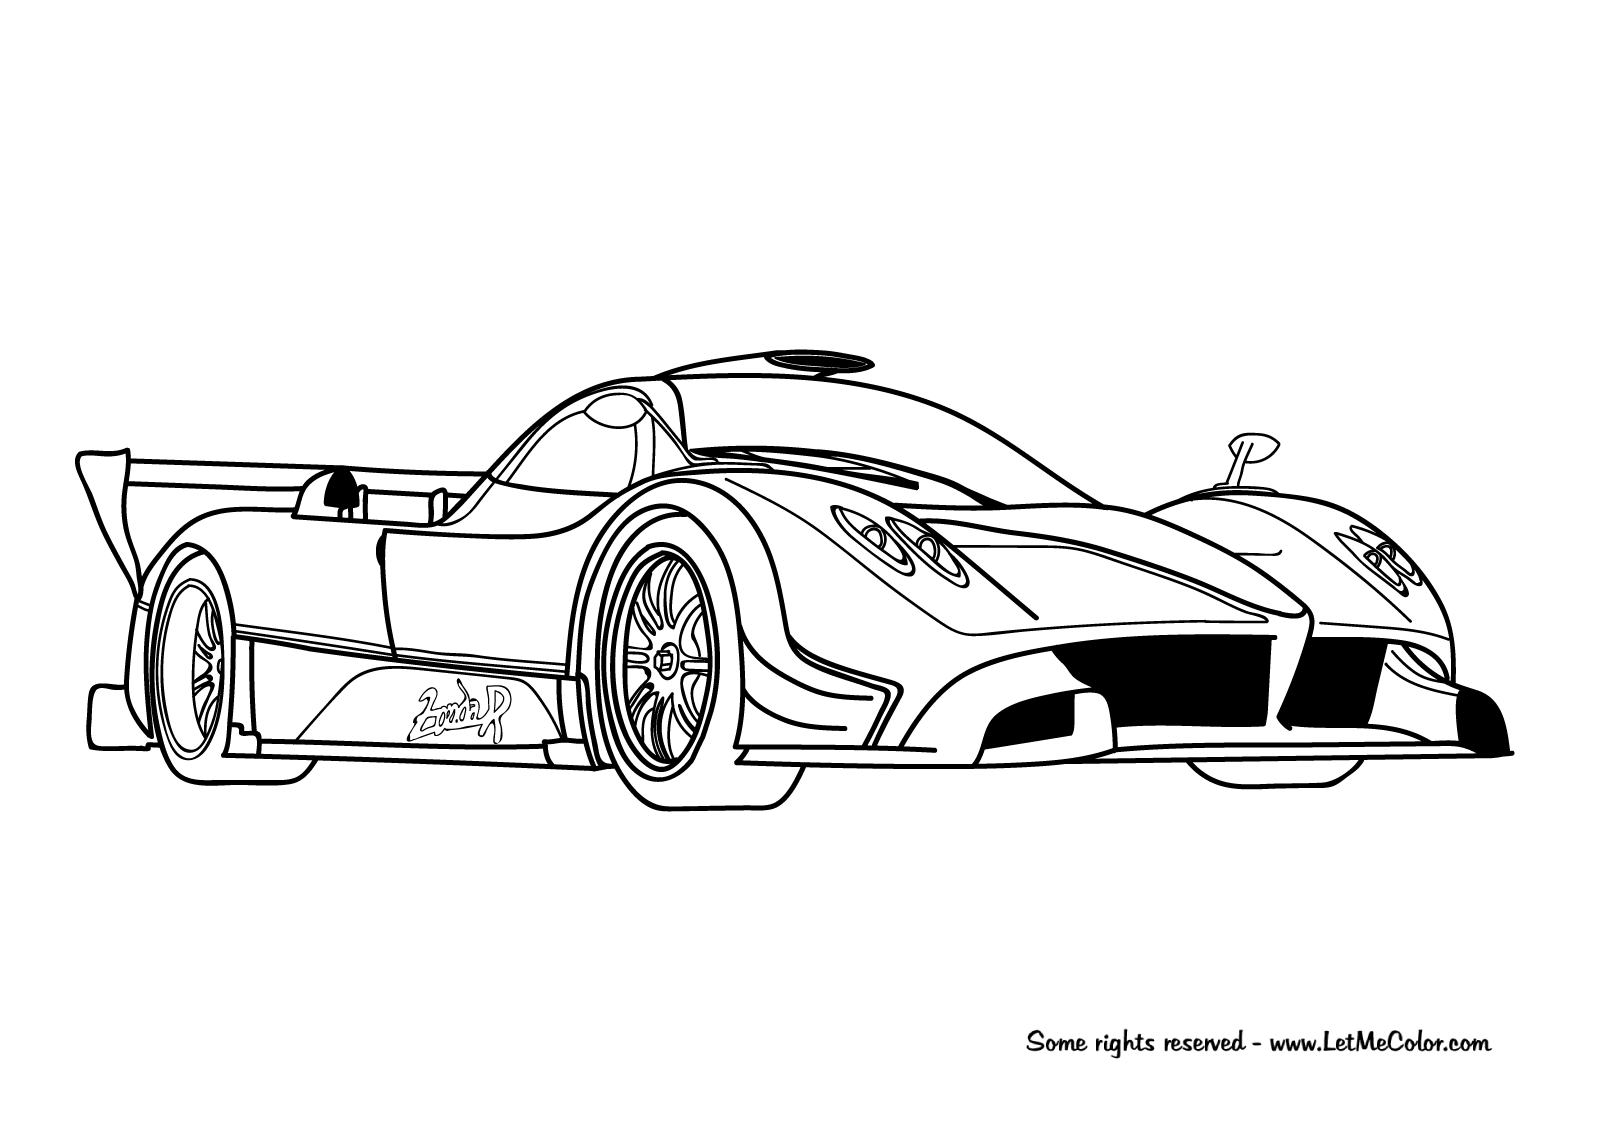 bugatti veyron super sport coloring pages